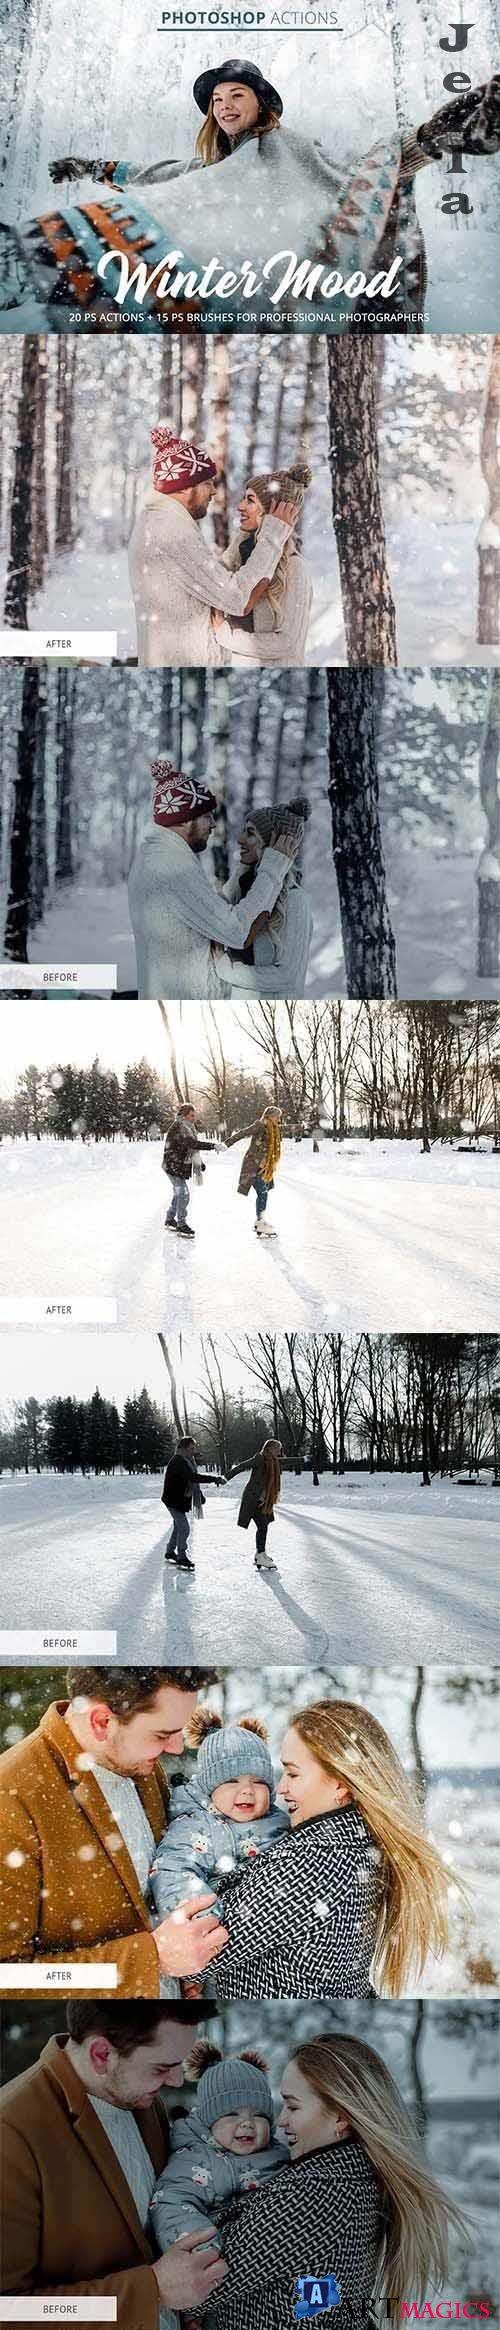 CreativeMarket - Winter Mood Actions for Photoshop - 4849563